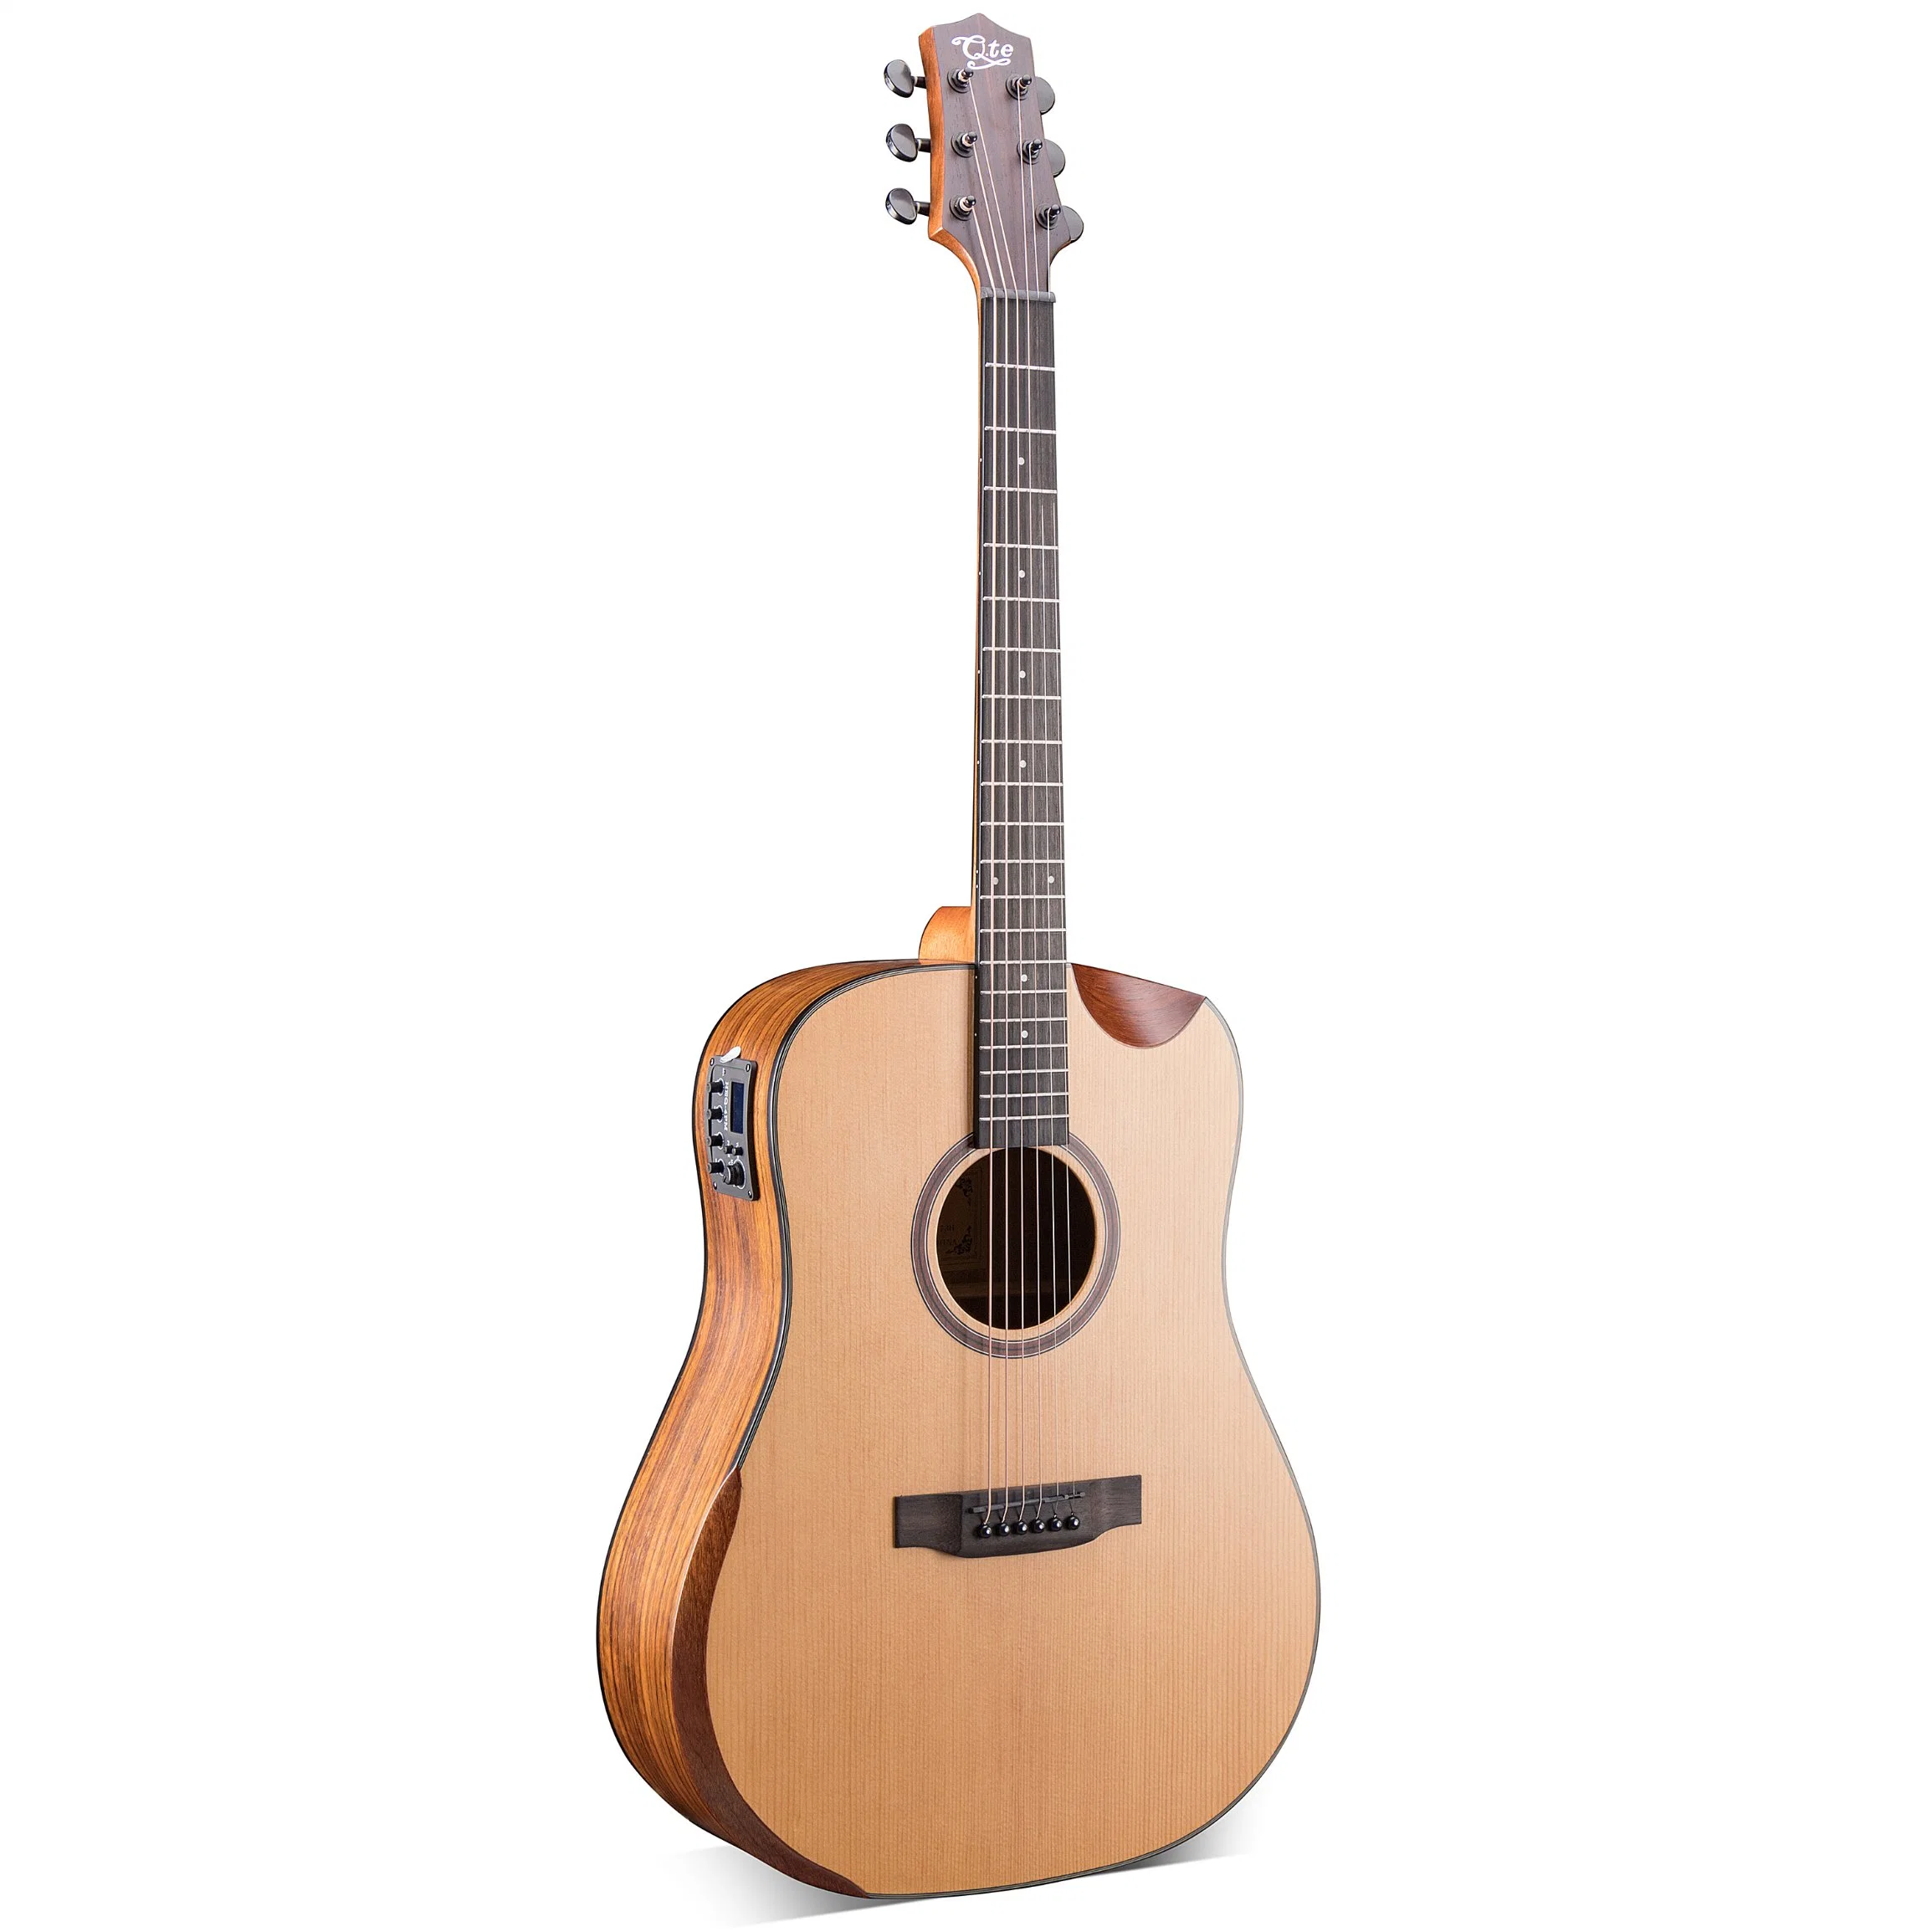 Artiny New Acoustic Guitar 41inch Musical Instrument